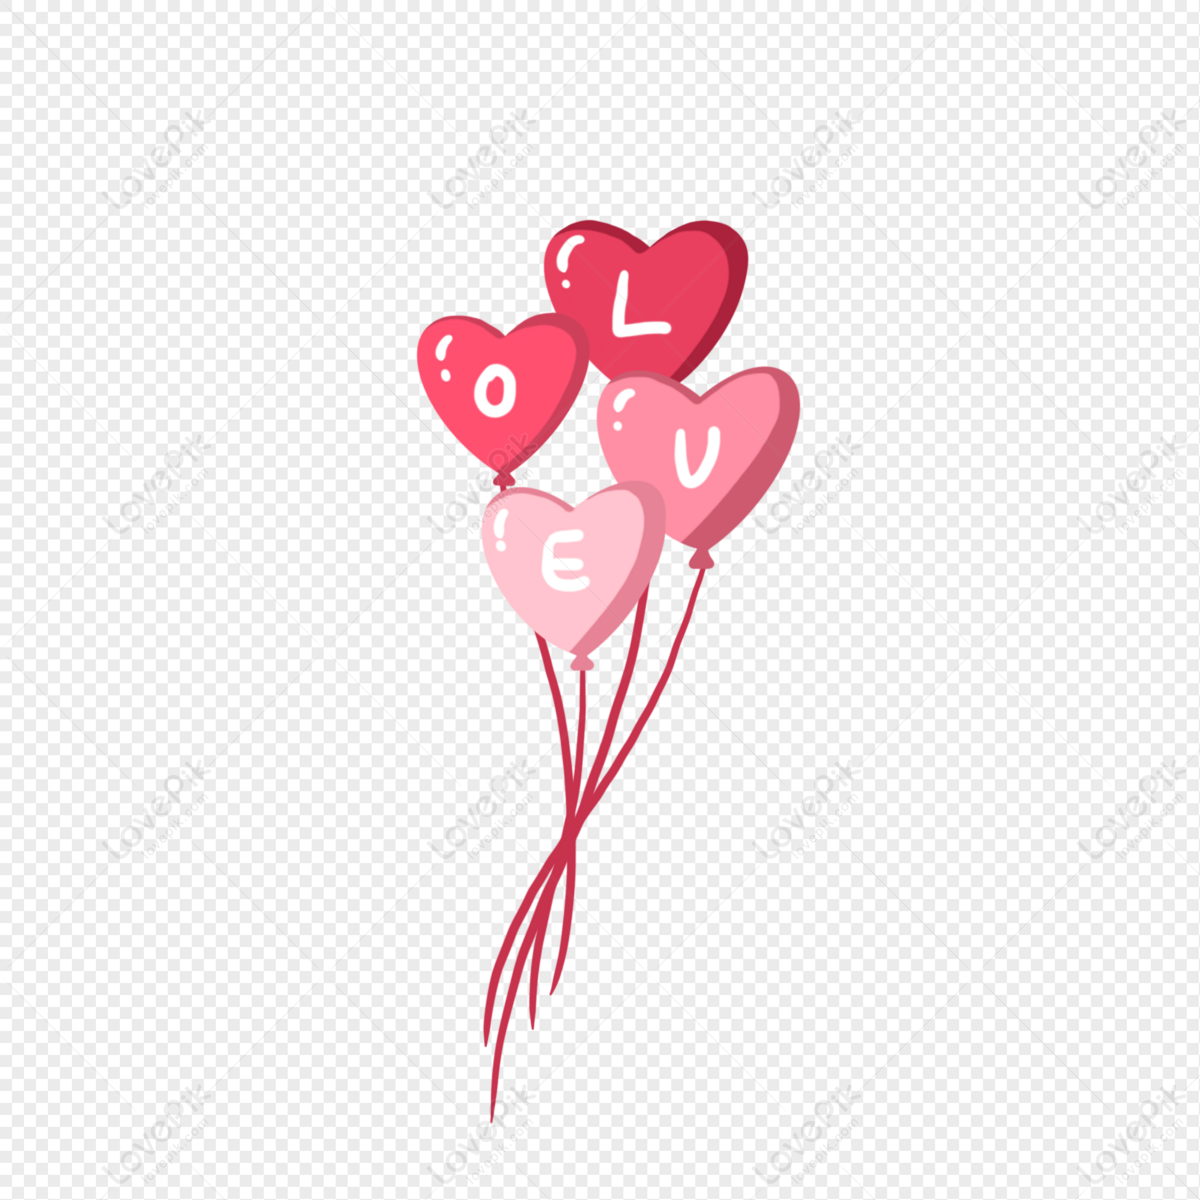 Cartoon Hand Drawn Romantic Heart Shaped Letter Balloon PNG Free Download  And Clipart Image For Free Download - Lovepik | 401272653